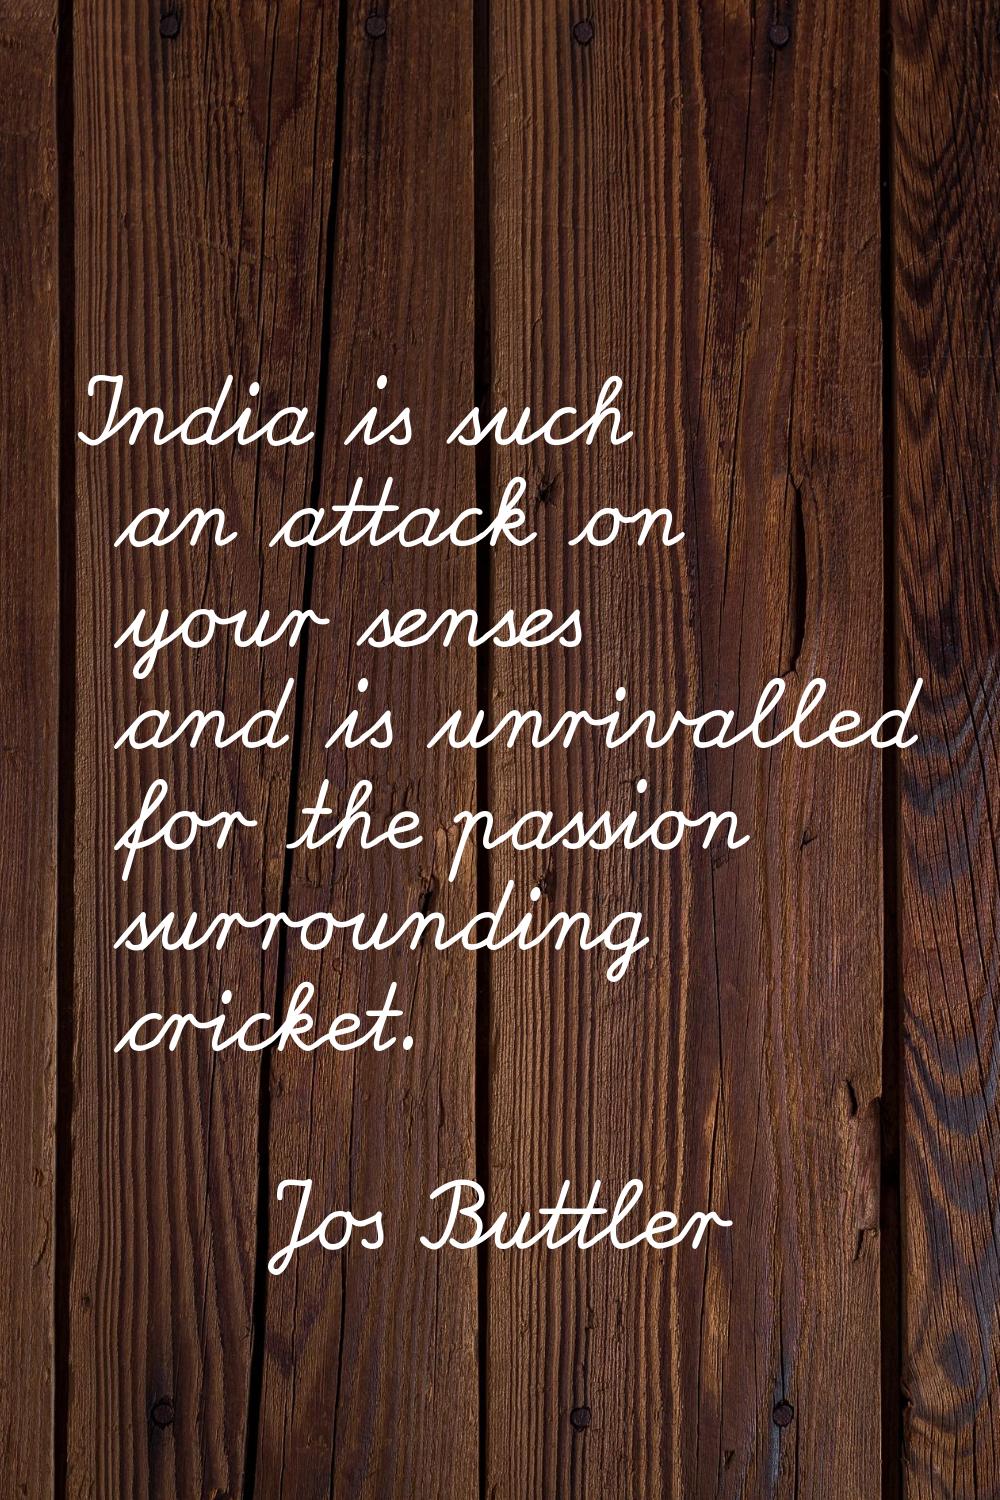 India is such an attack on your senses and is unrivalled for the passion surrounding cricket.